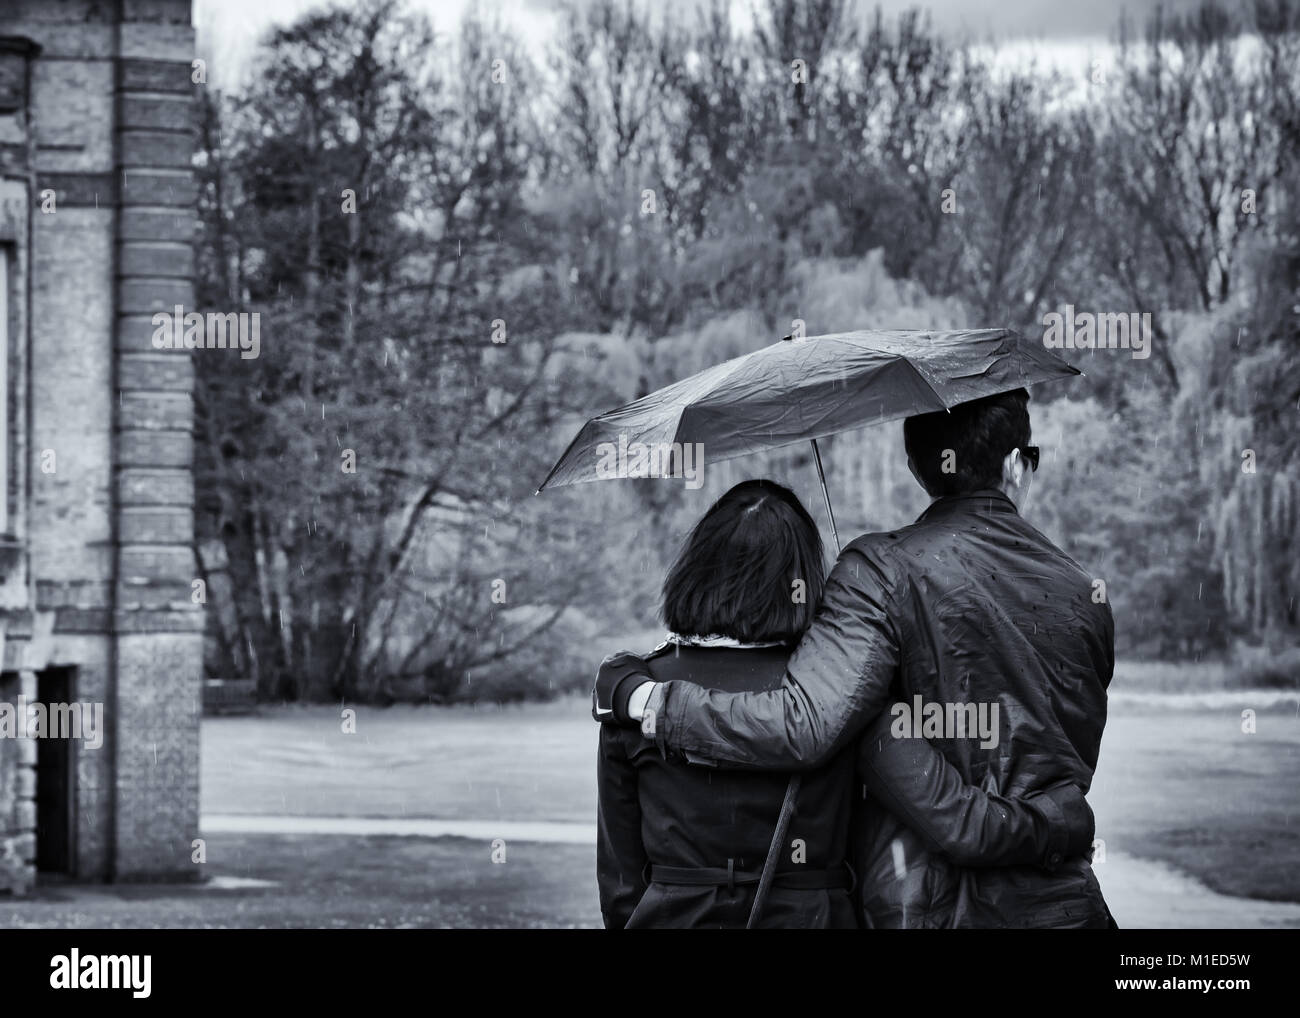 Young couple walk in the rain under an umbrella at Wrest Park, black and white image Stock Photo